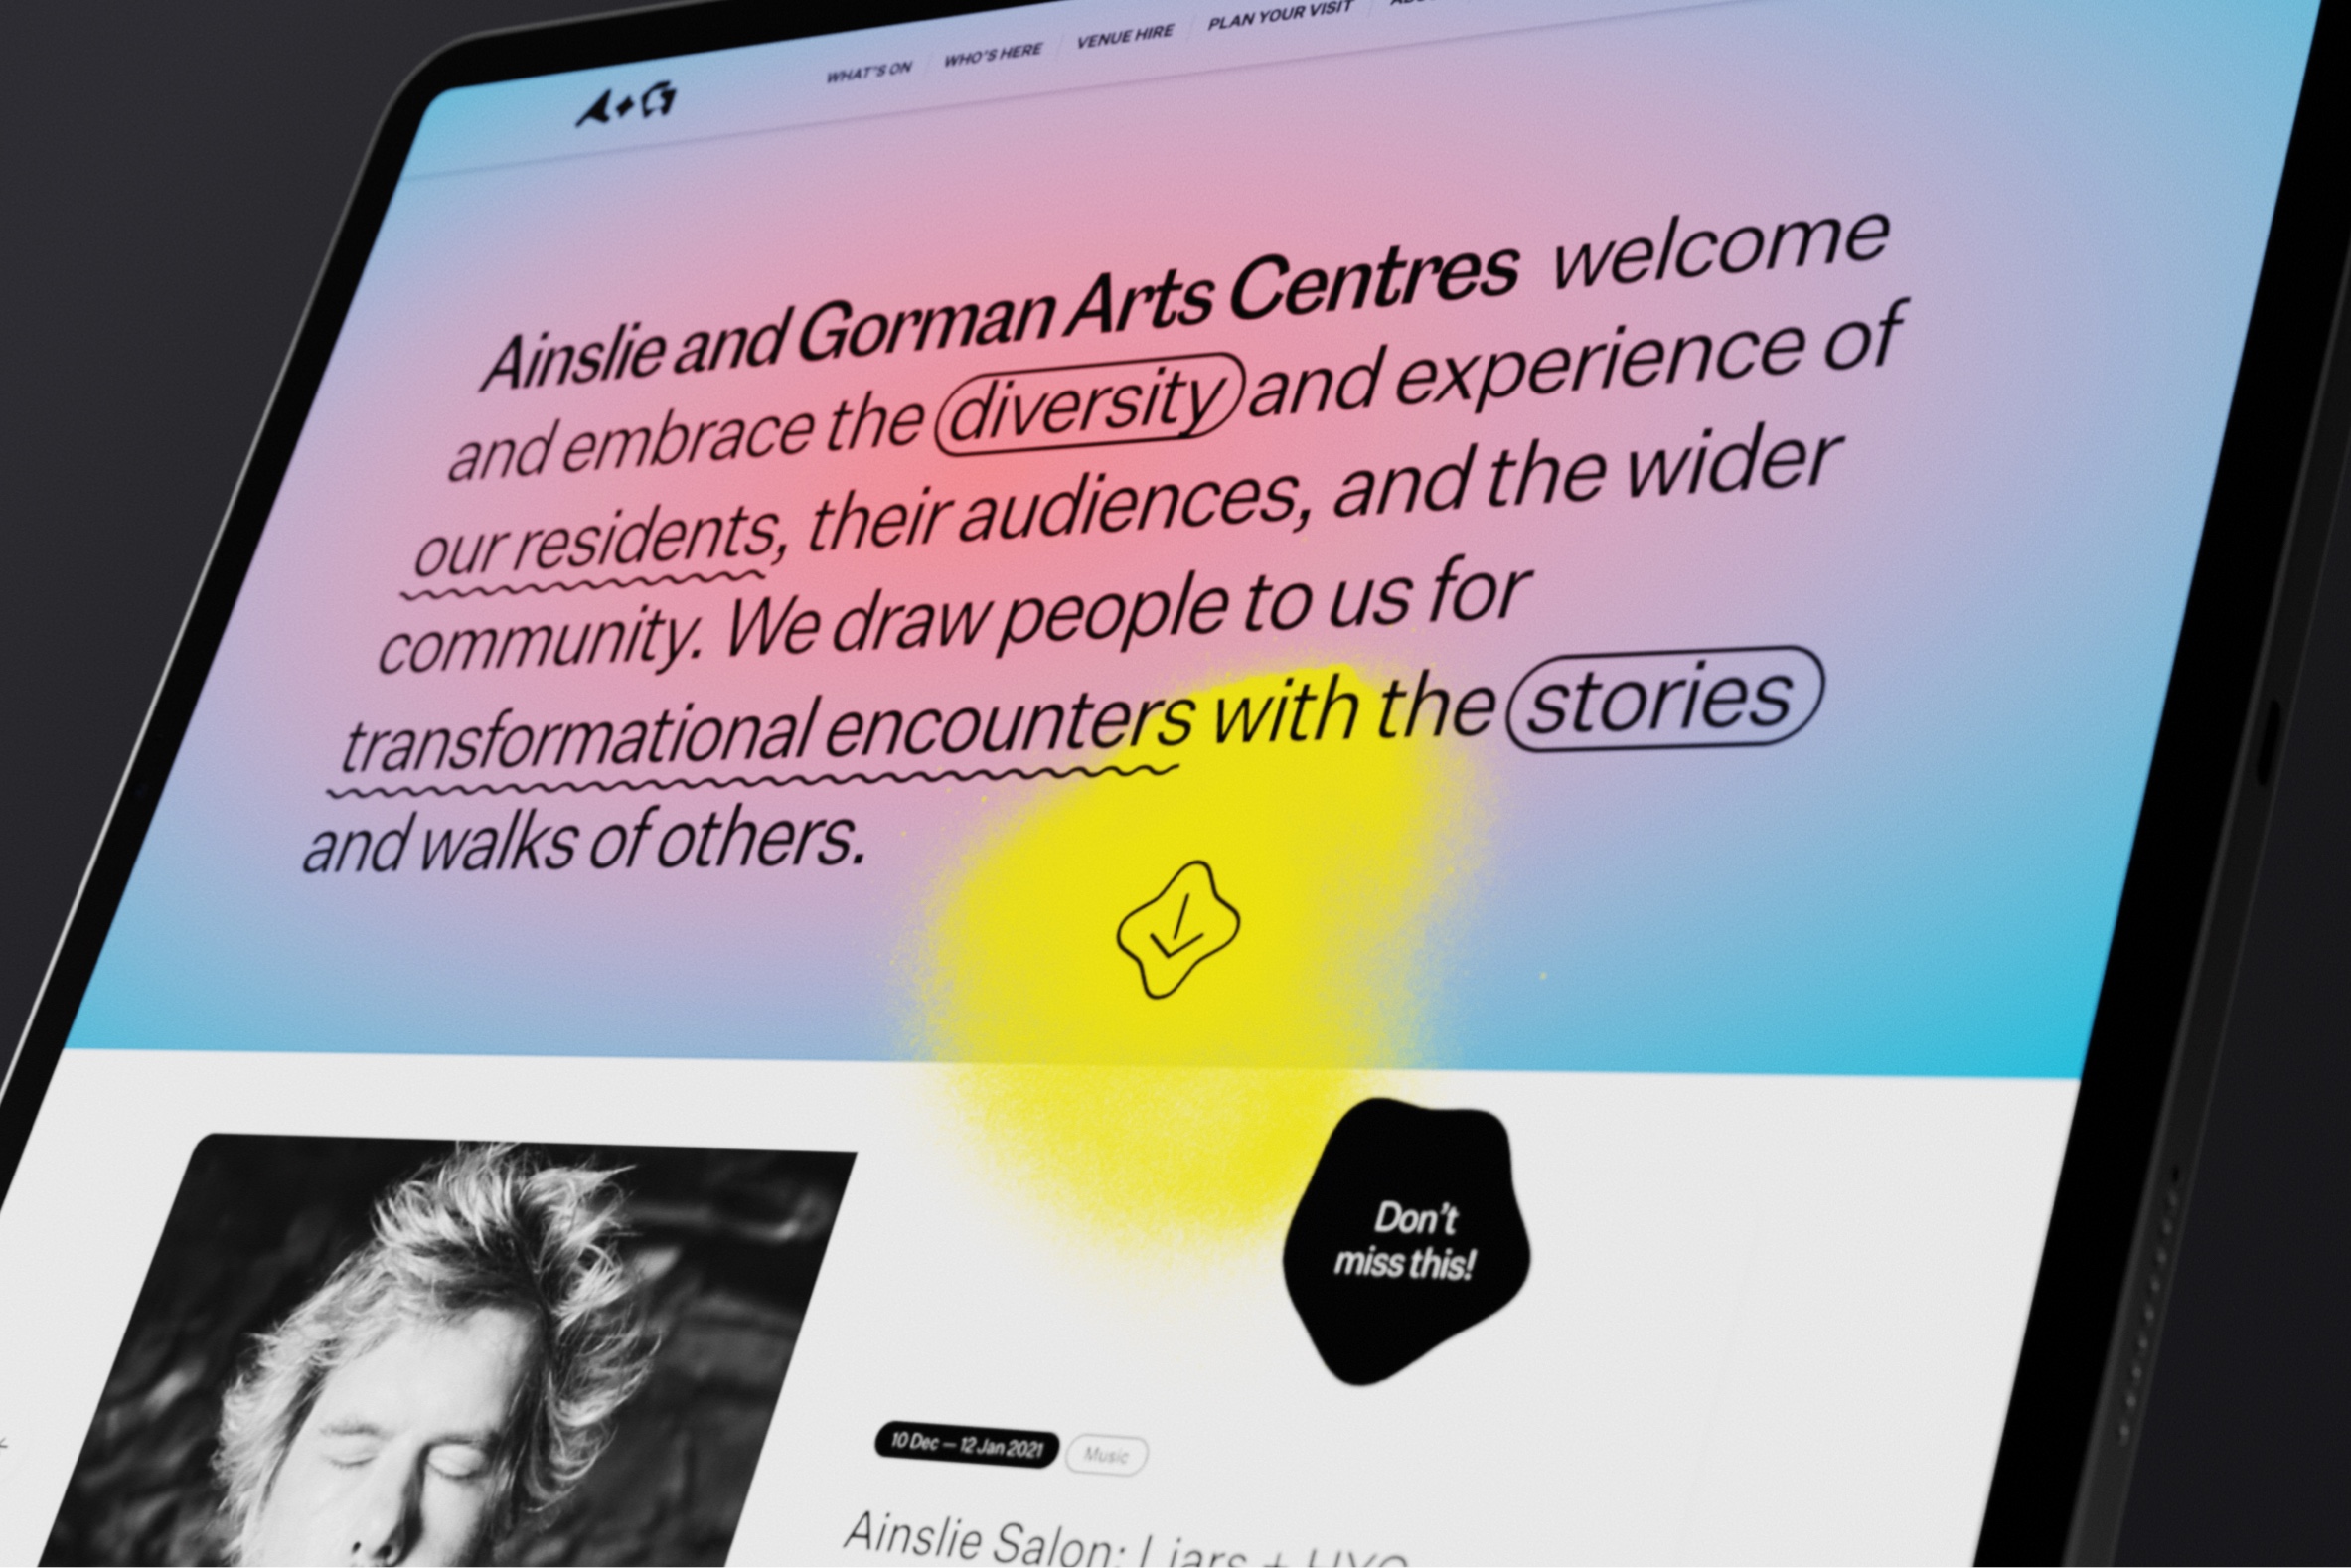 An iPad displaying the homepage of the Ainslie and Gorman Arts Centres website.